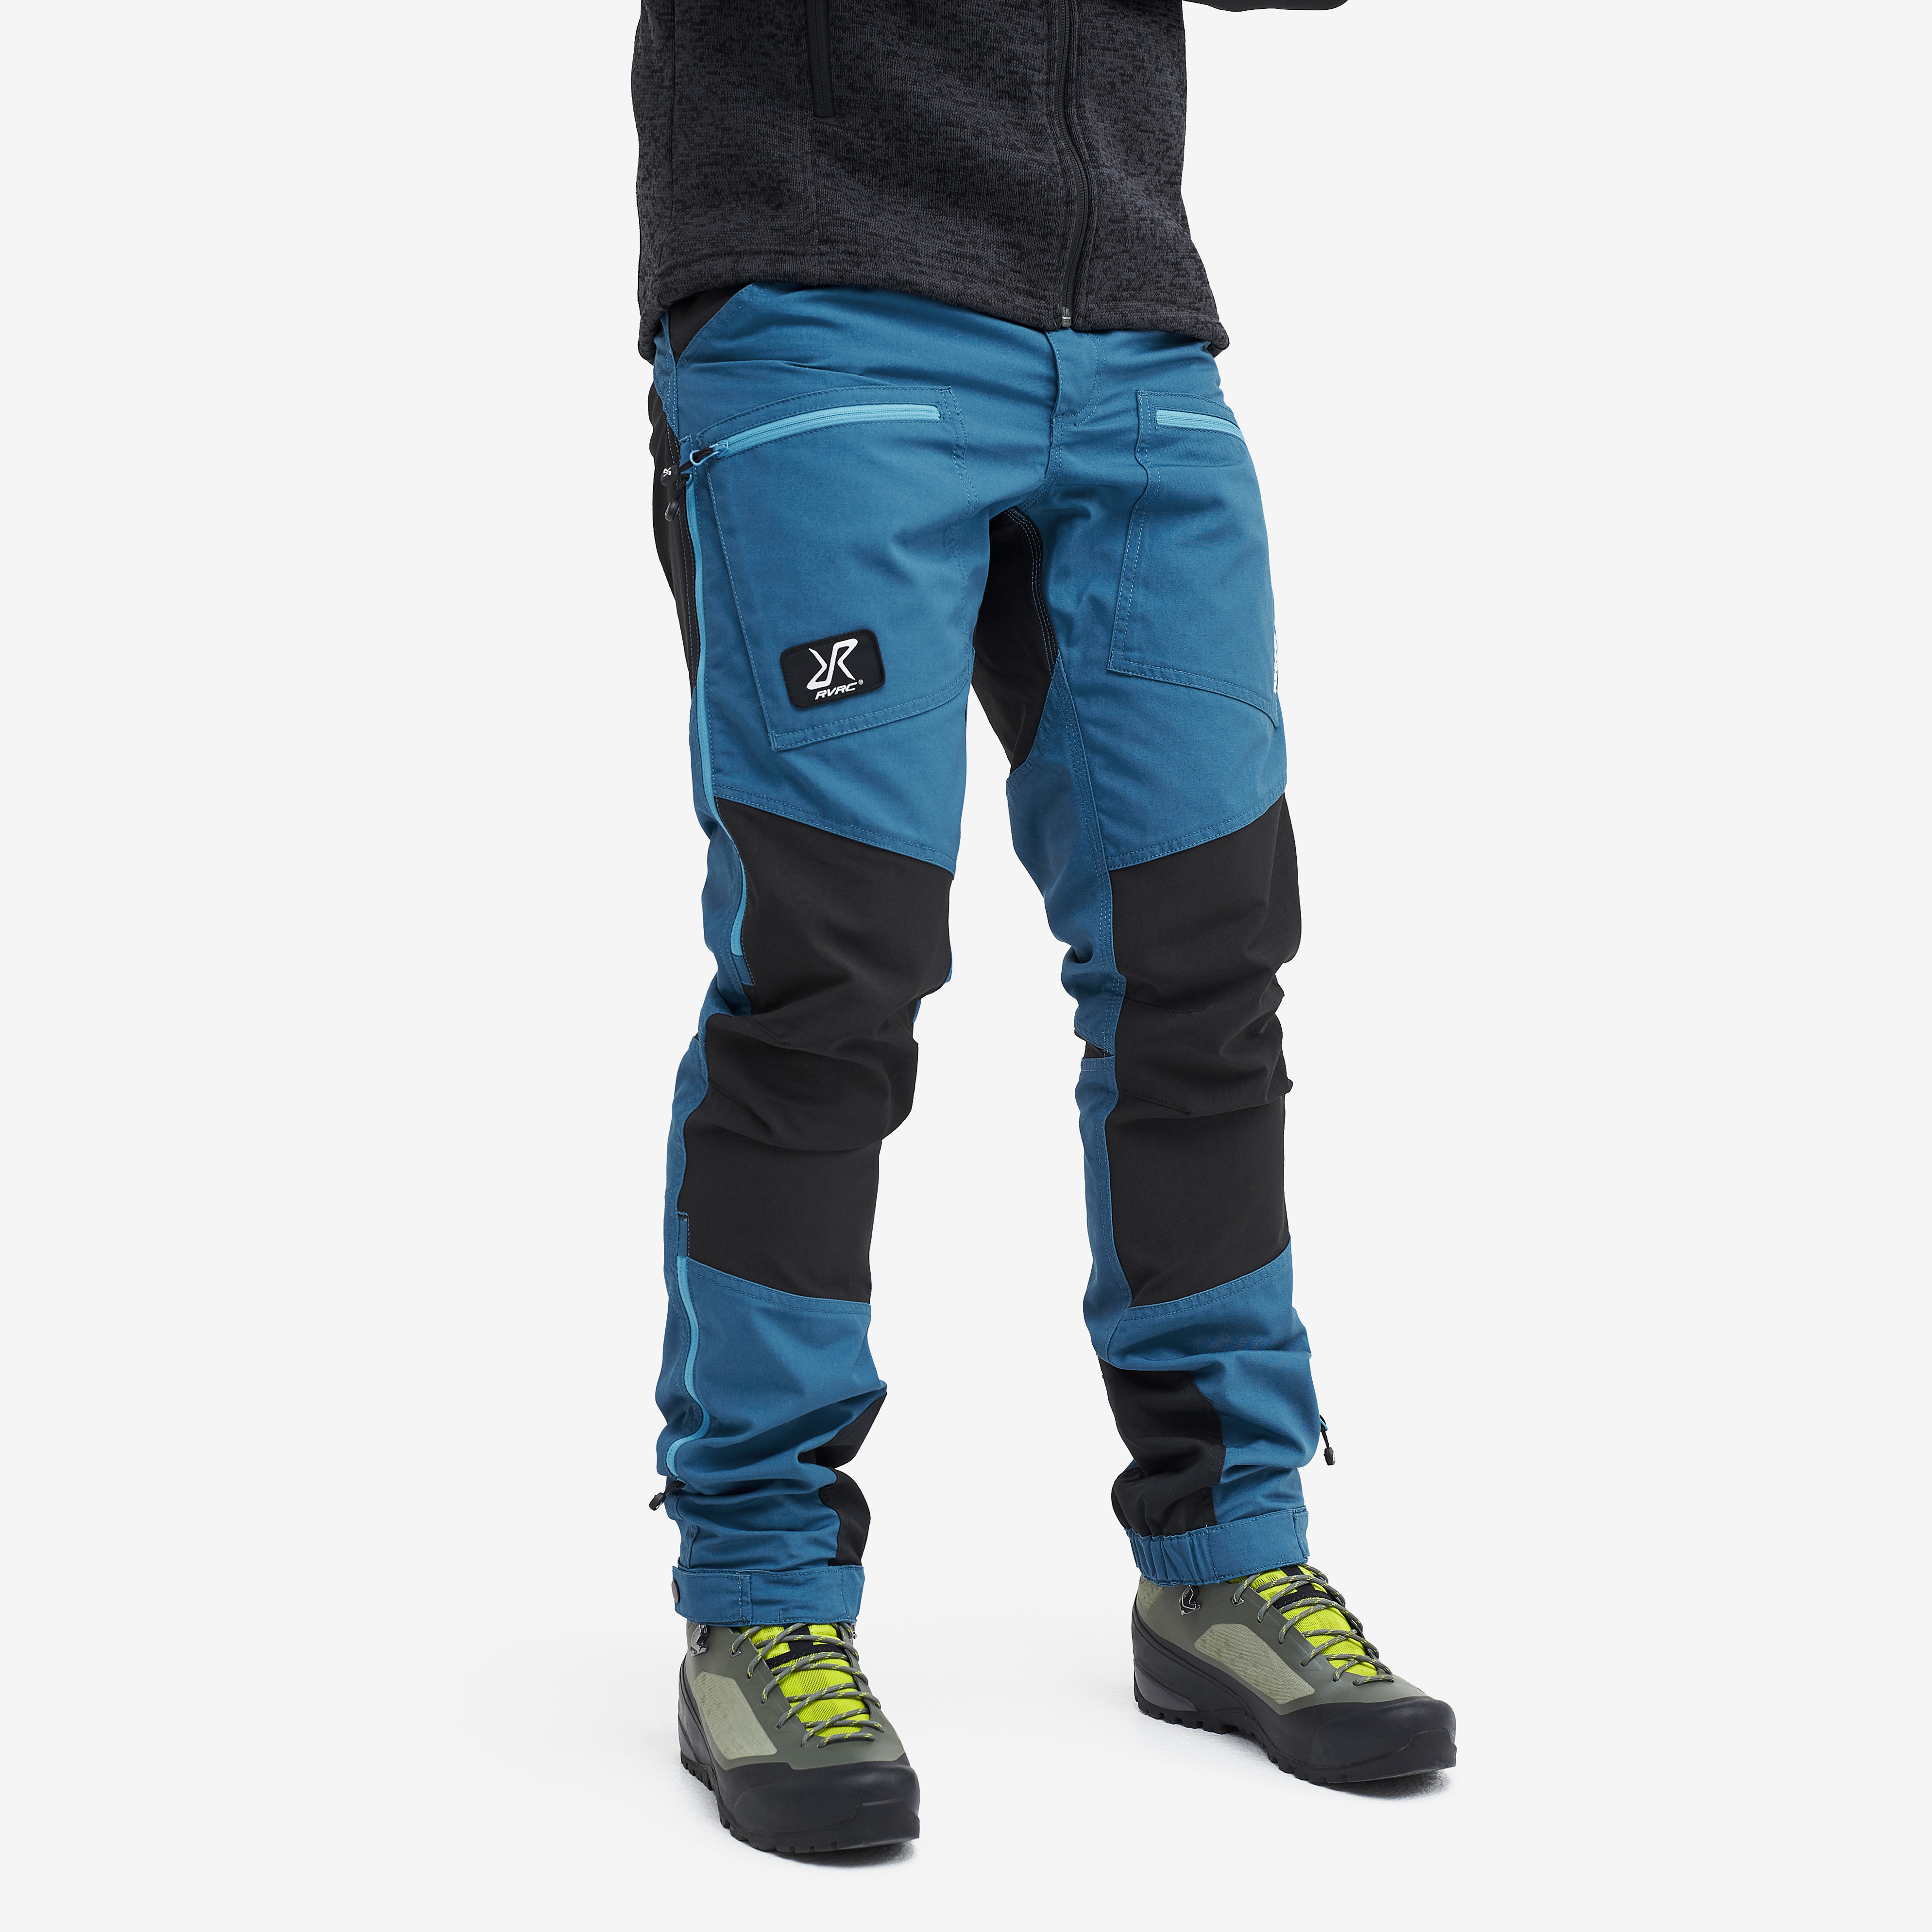 Nordwand Pro Rescue hiking trousers for men in blue